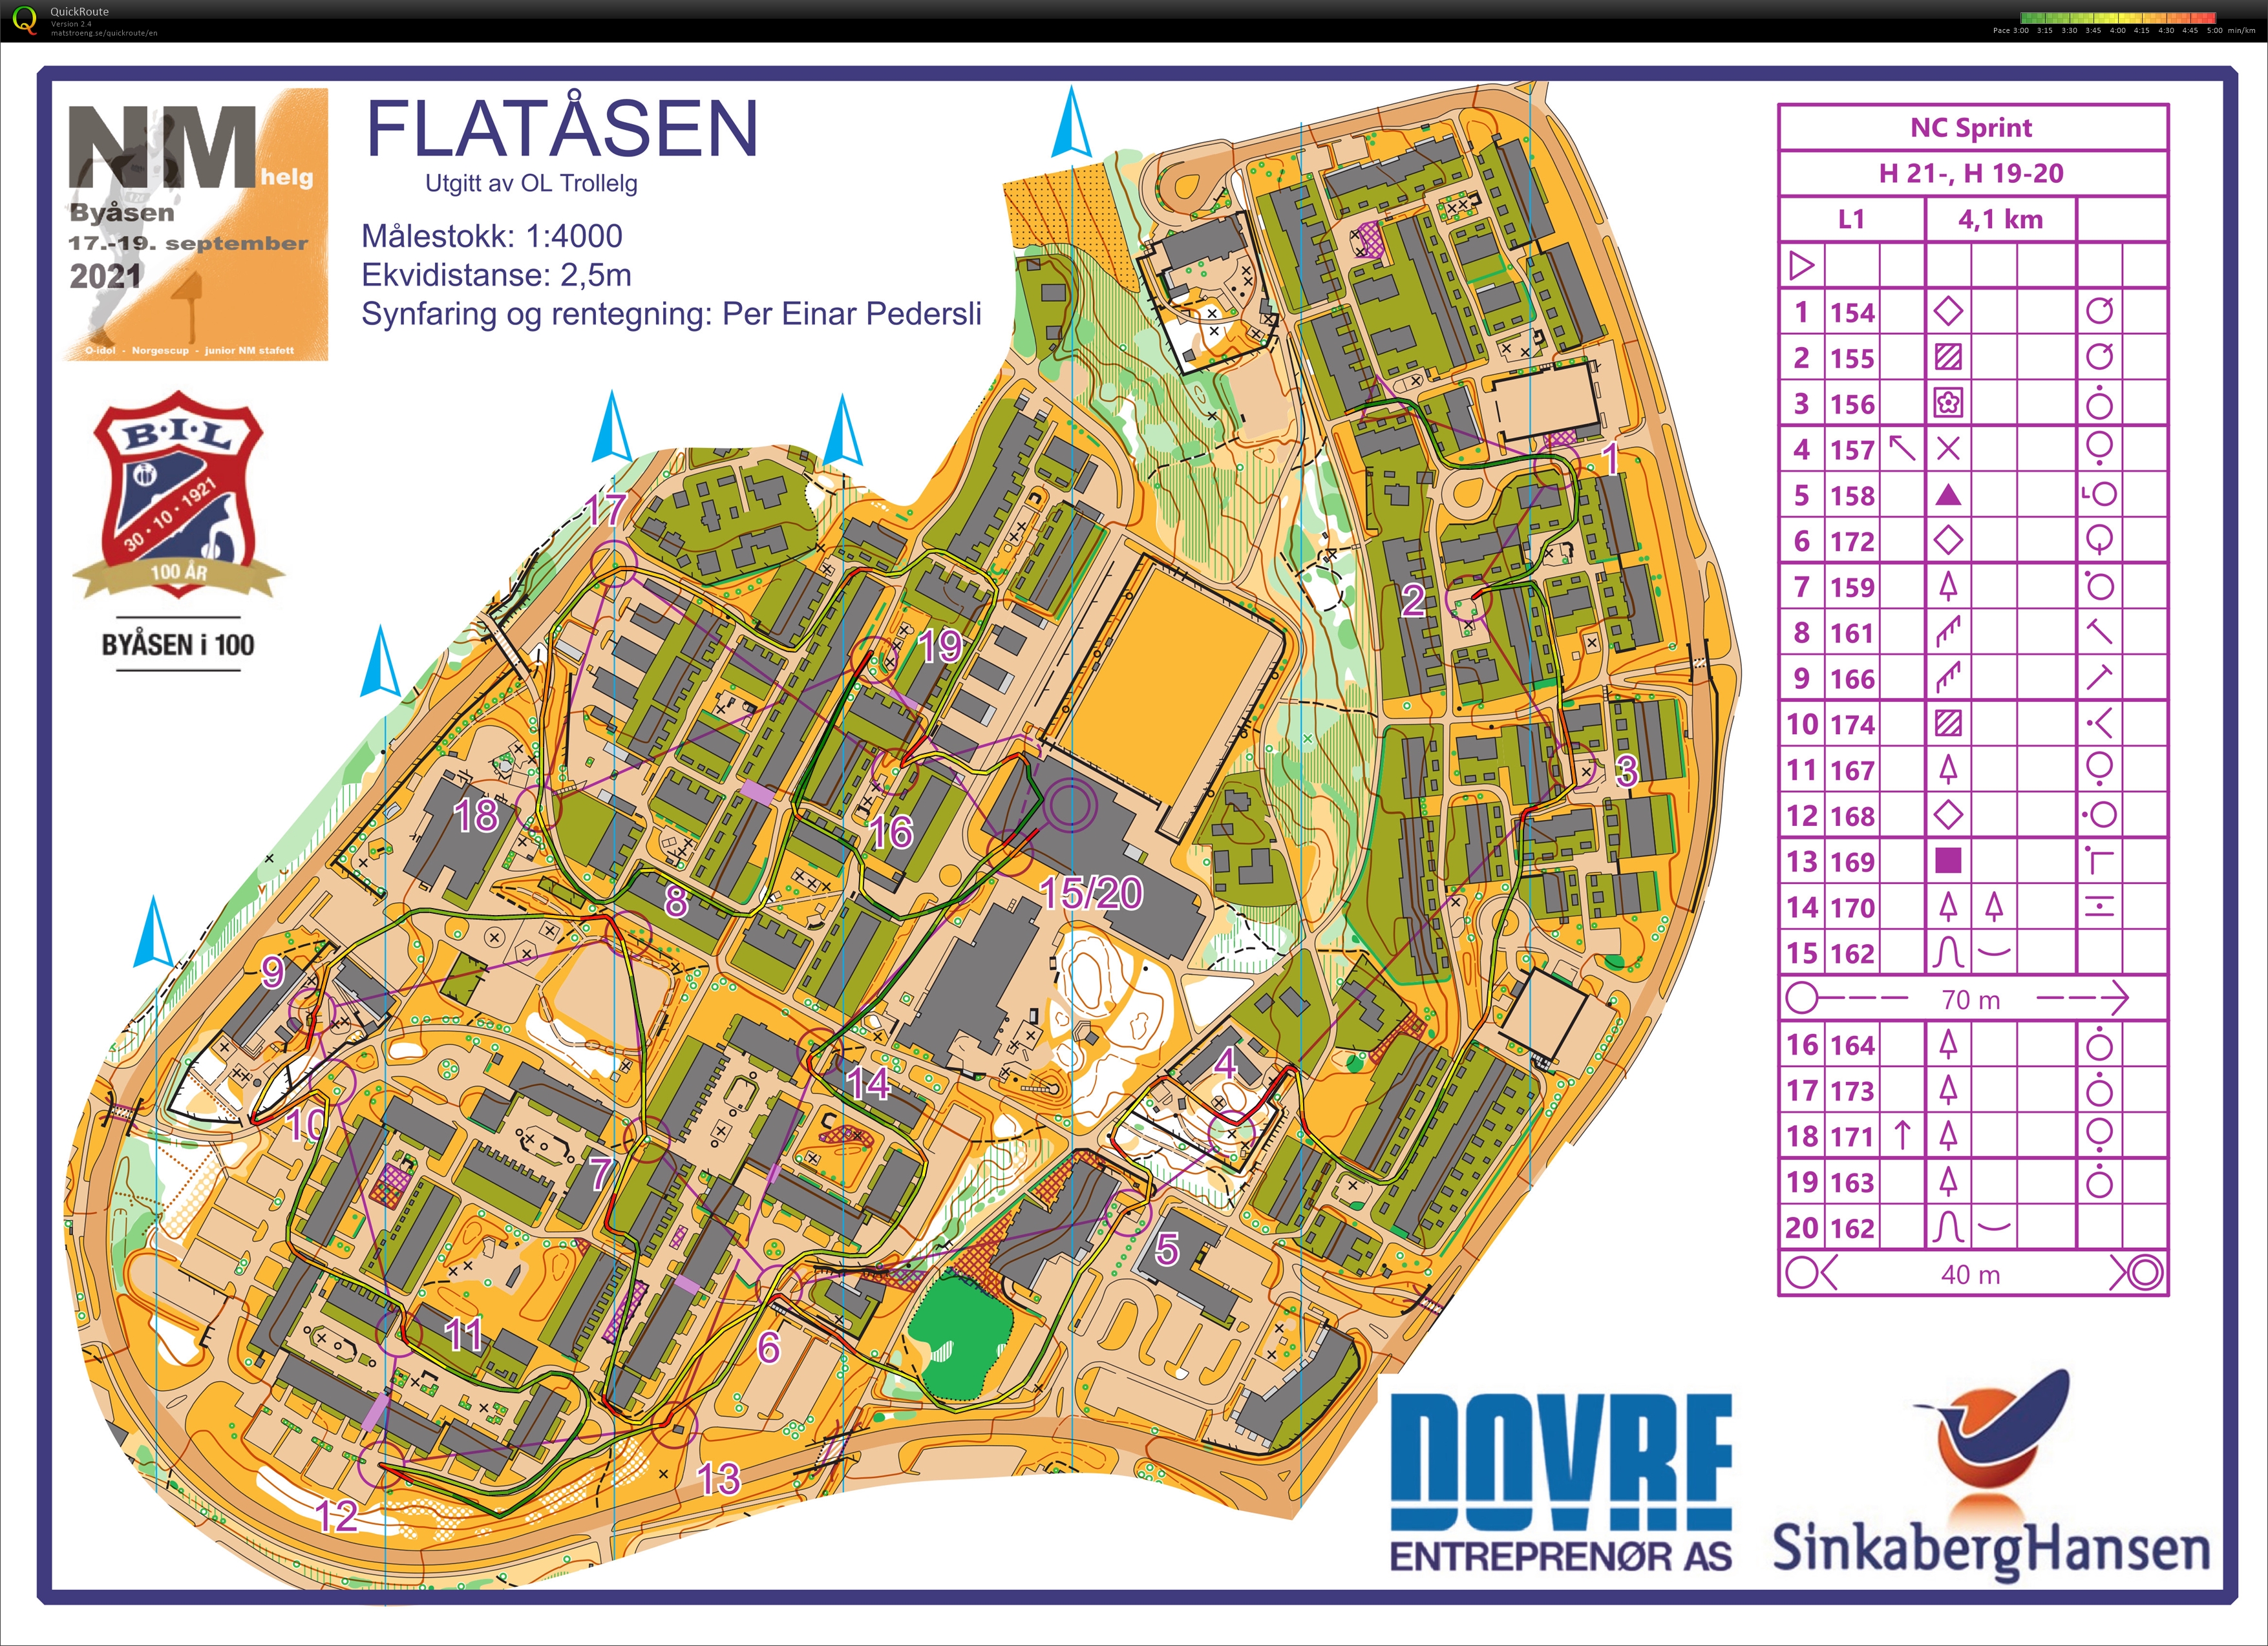 Norgescup Sprint (17/09/2021)